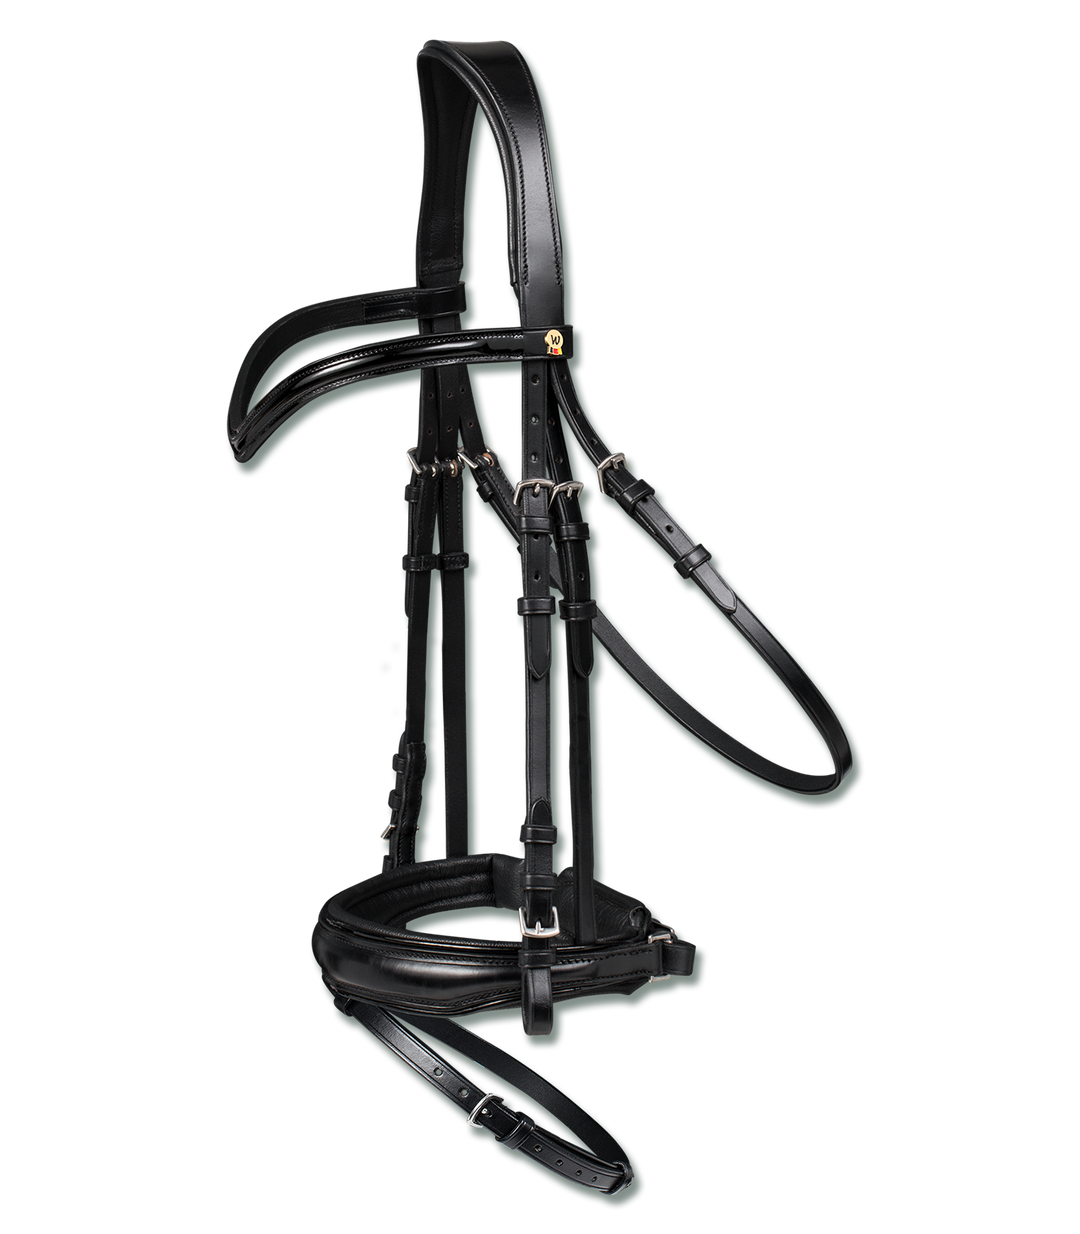 Waldhausen S-Line Patent Leather Bridle